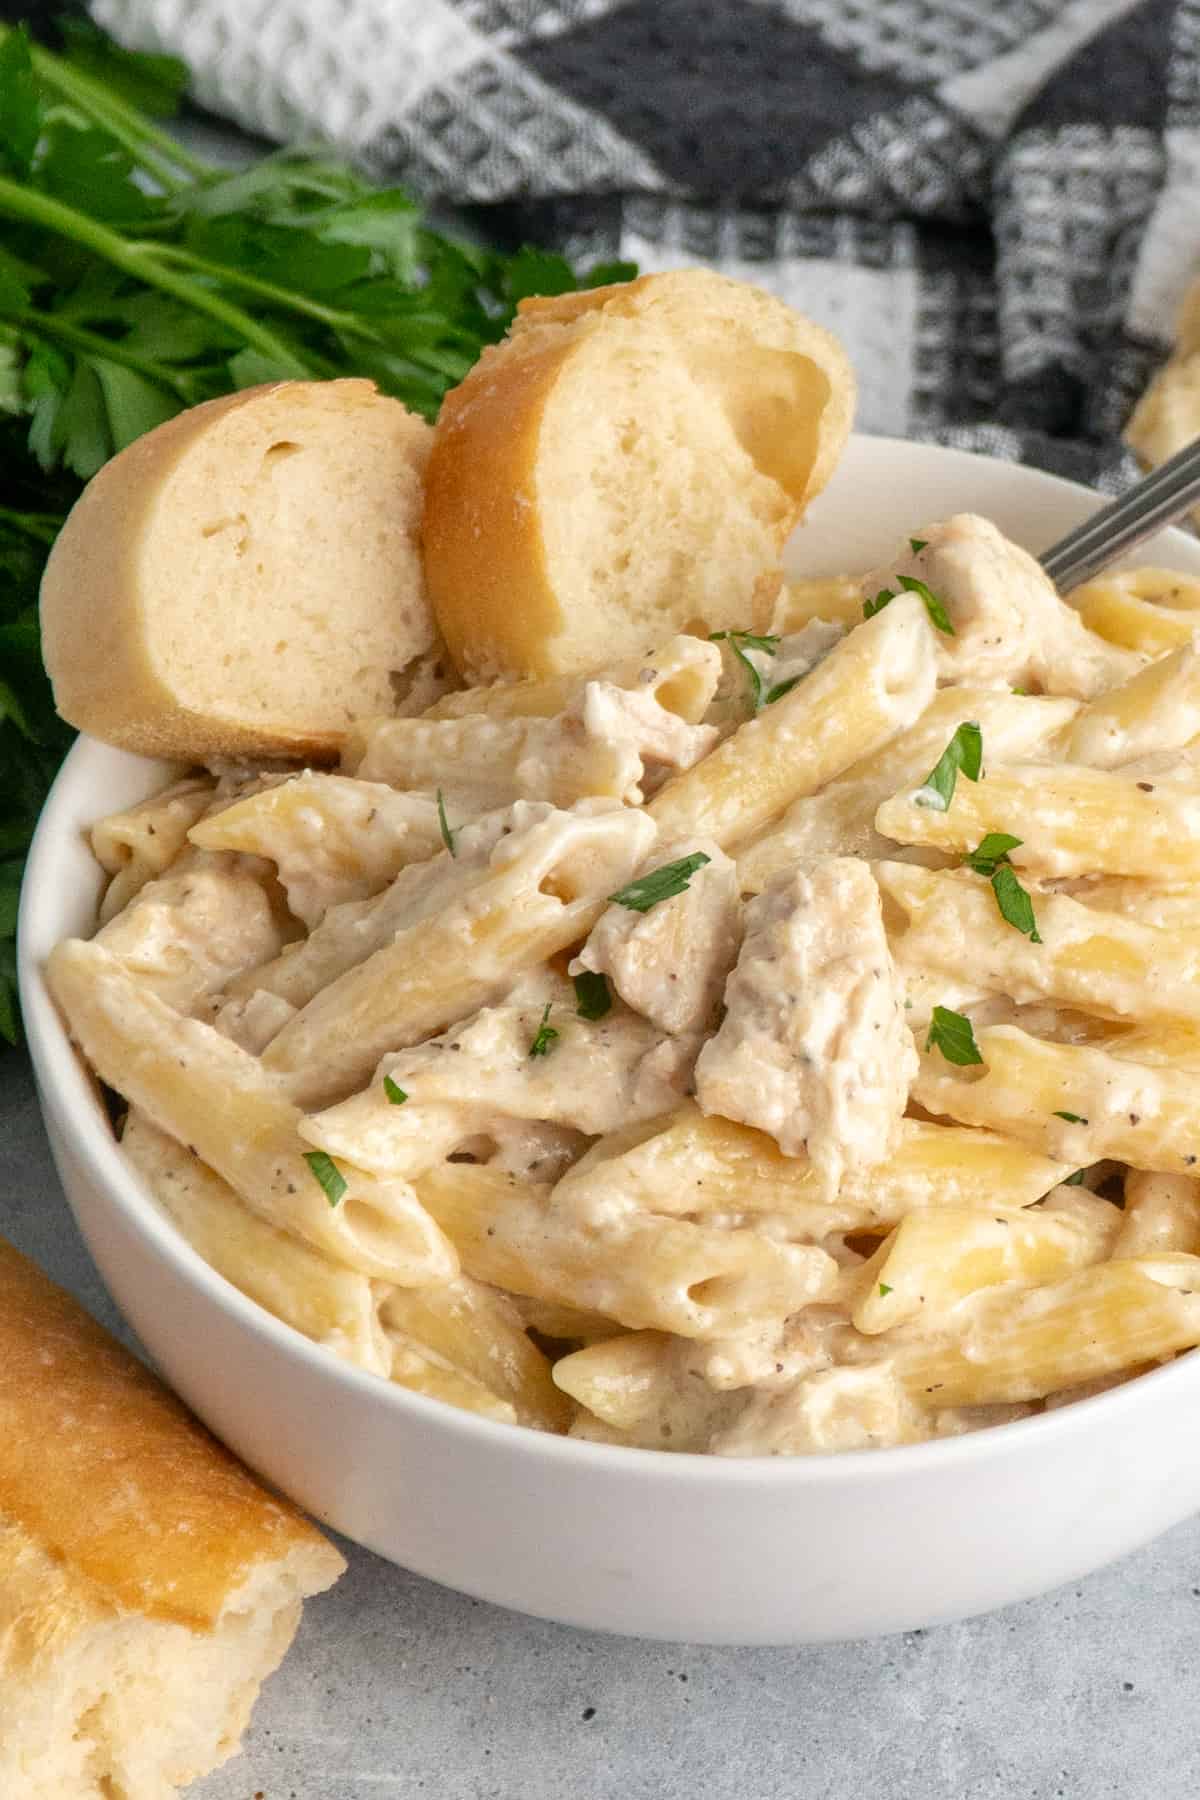 Crock pot chicken alfredo in a white bowl with pieces of bread.